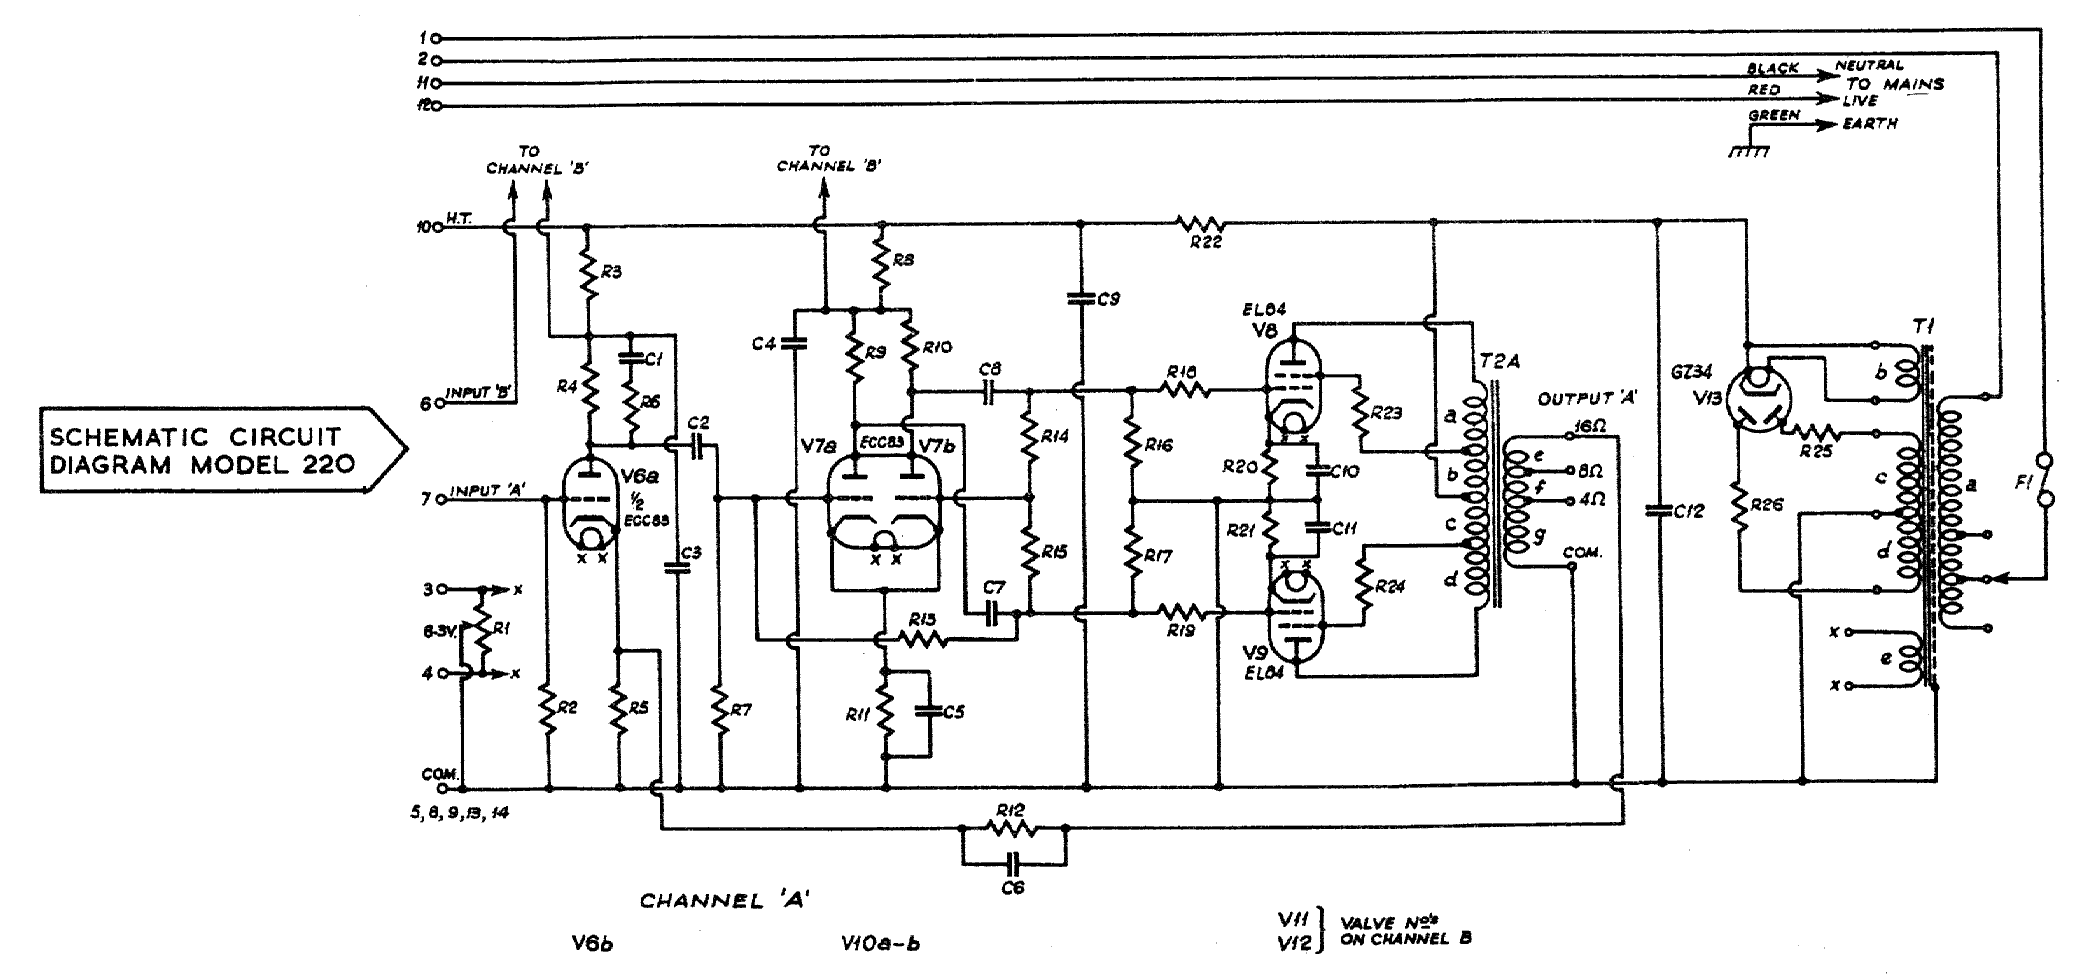 Circuit Diagram for Armstrong 220 Power Amp